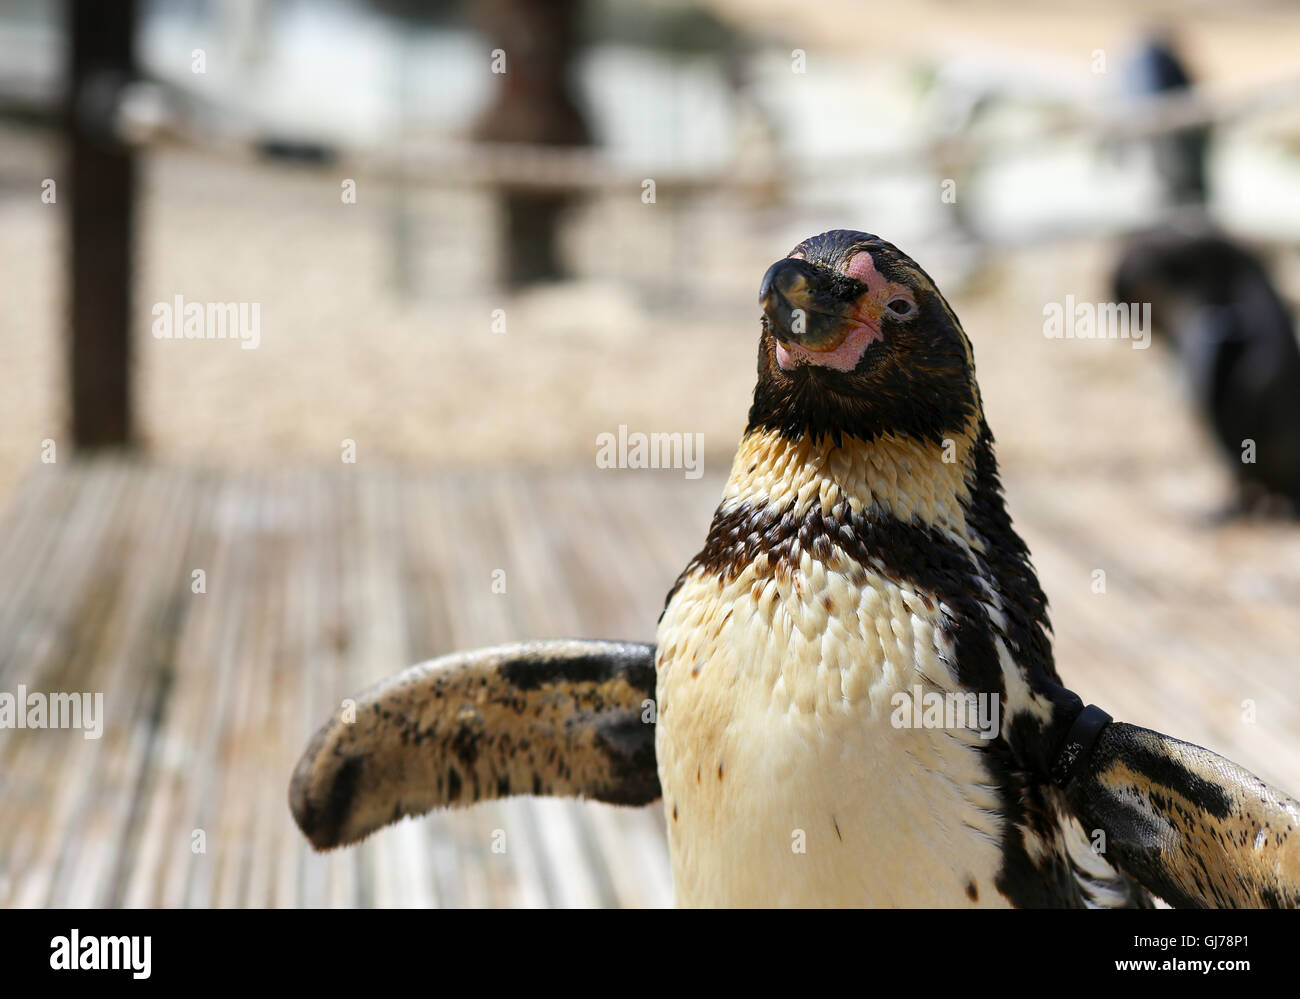 Close-up of Humboldt Penguin Spheniscus humboldti social animals in a zoo, wooden boards background Stock Photo